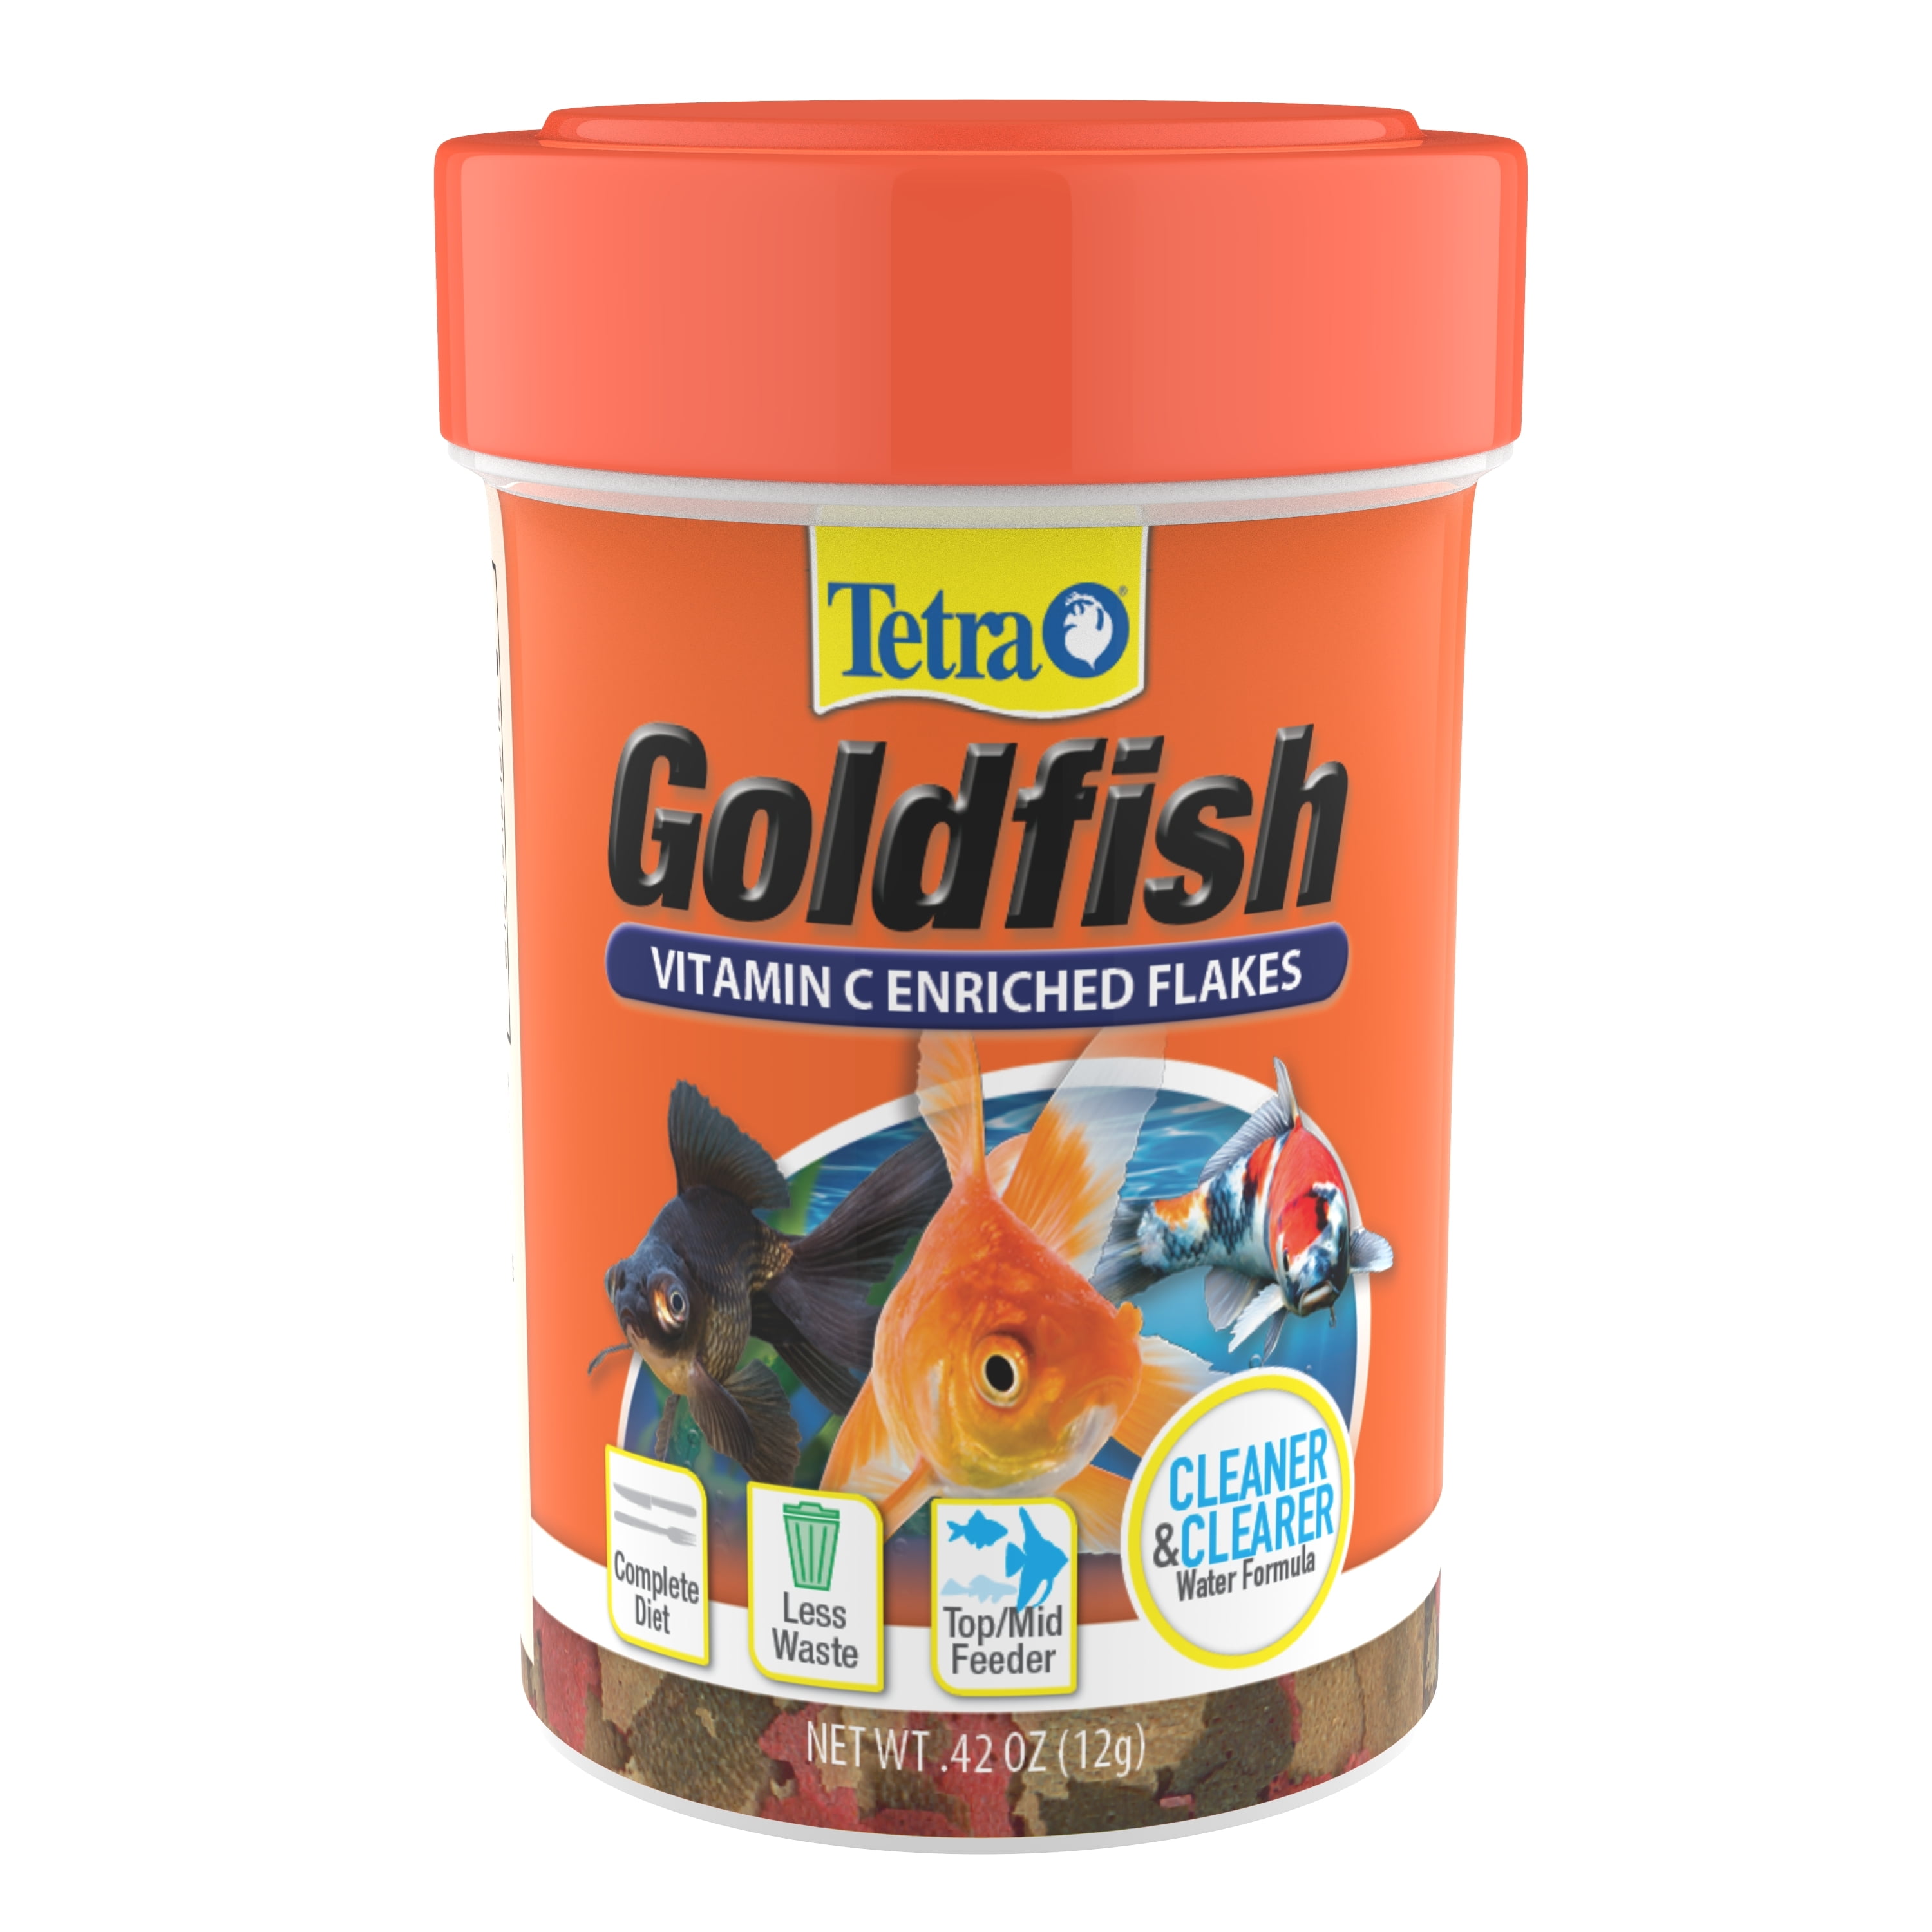 Tetra Cichlid Flakes for Mid and Top Feeding, 5.65 oz.